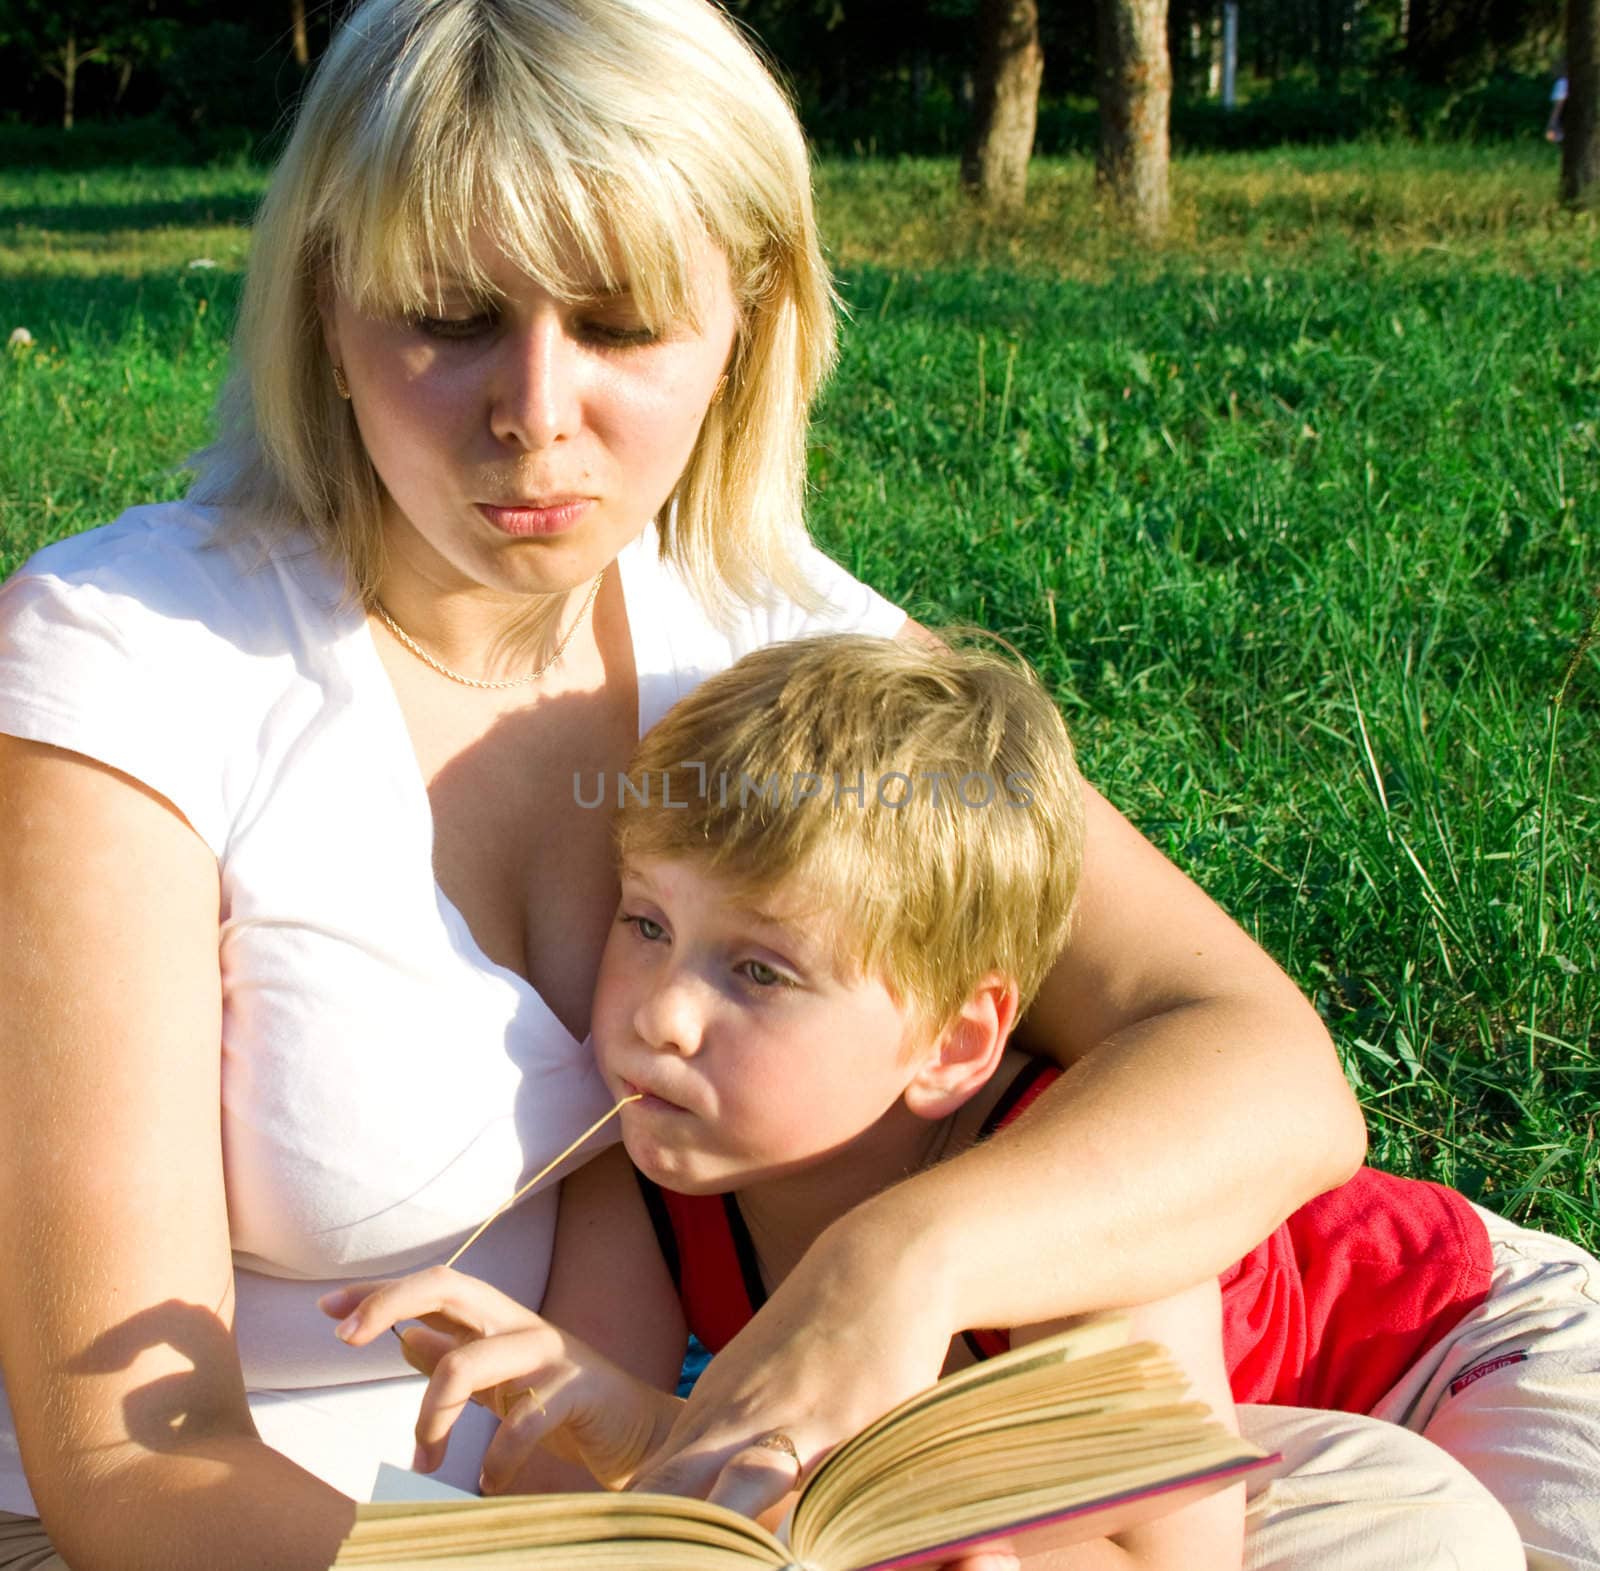 Mother sits on a grass with the son in a lap and reads to the boy the book